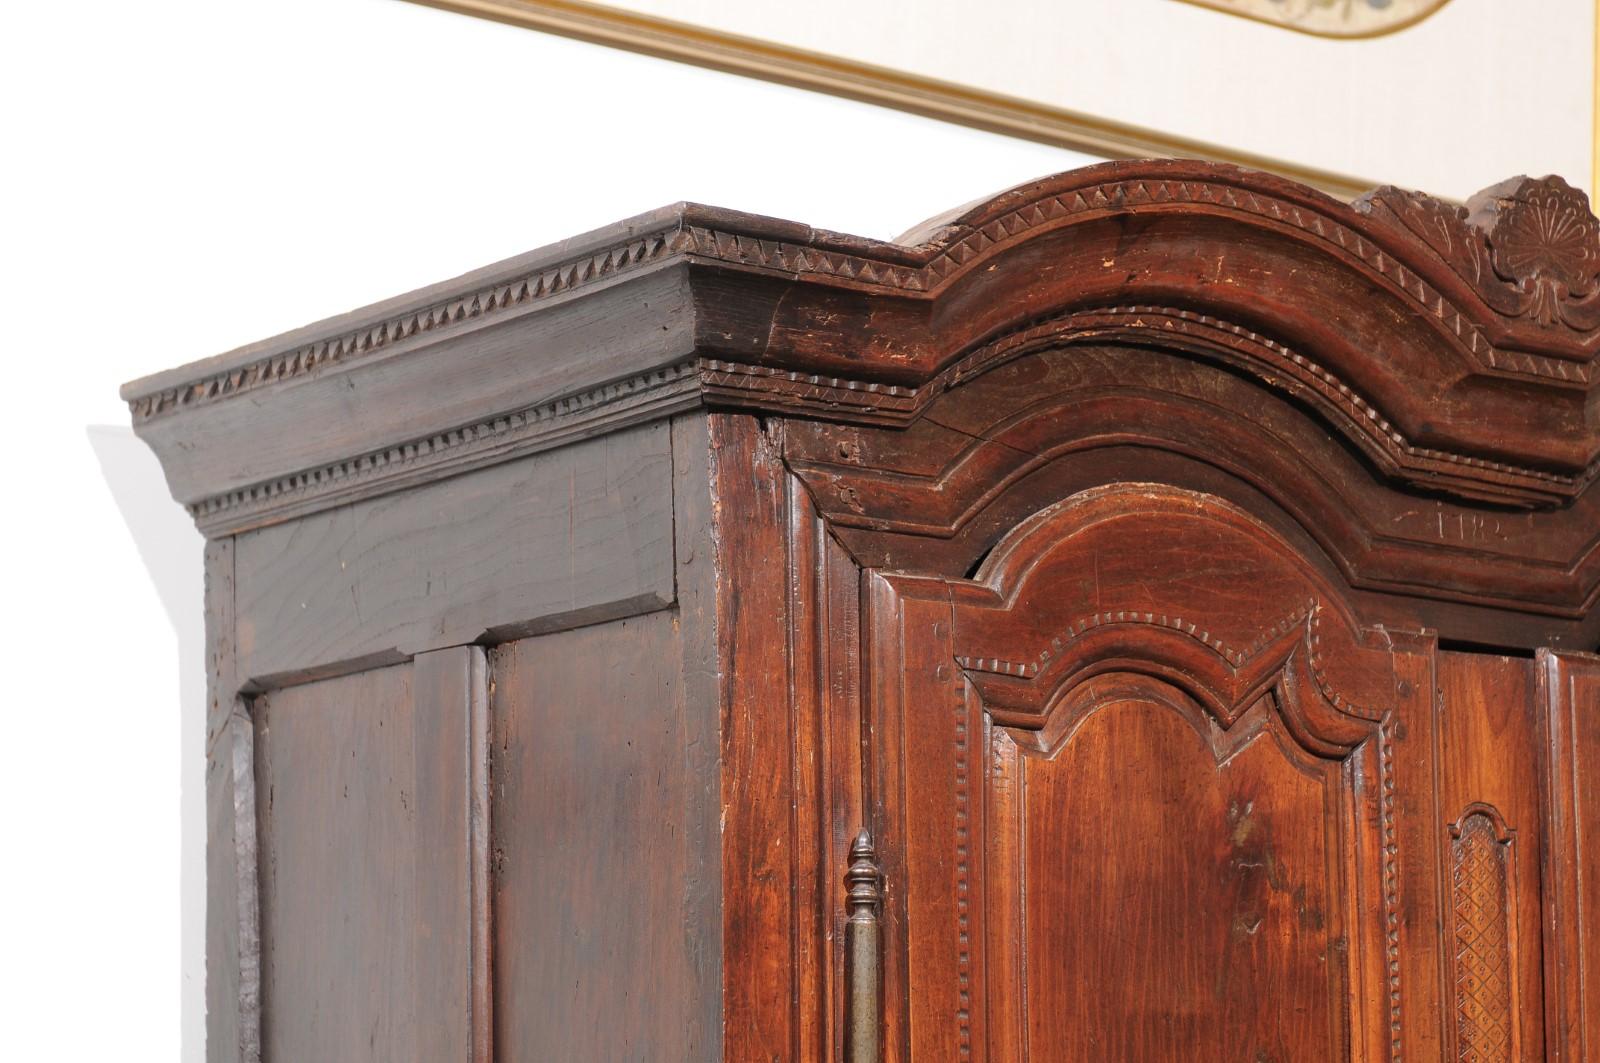 French Wild Cherry Armoire from Rennes, Brittany Dated 1792 at the Cornice 6